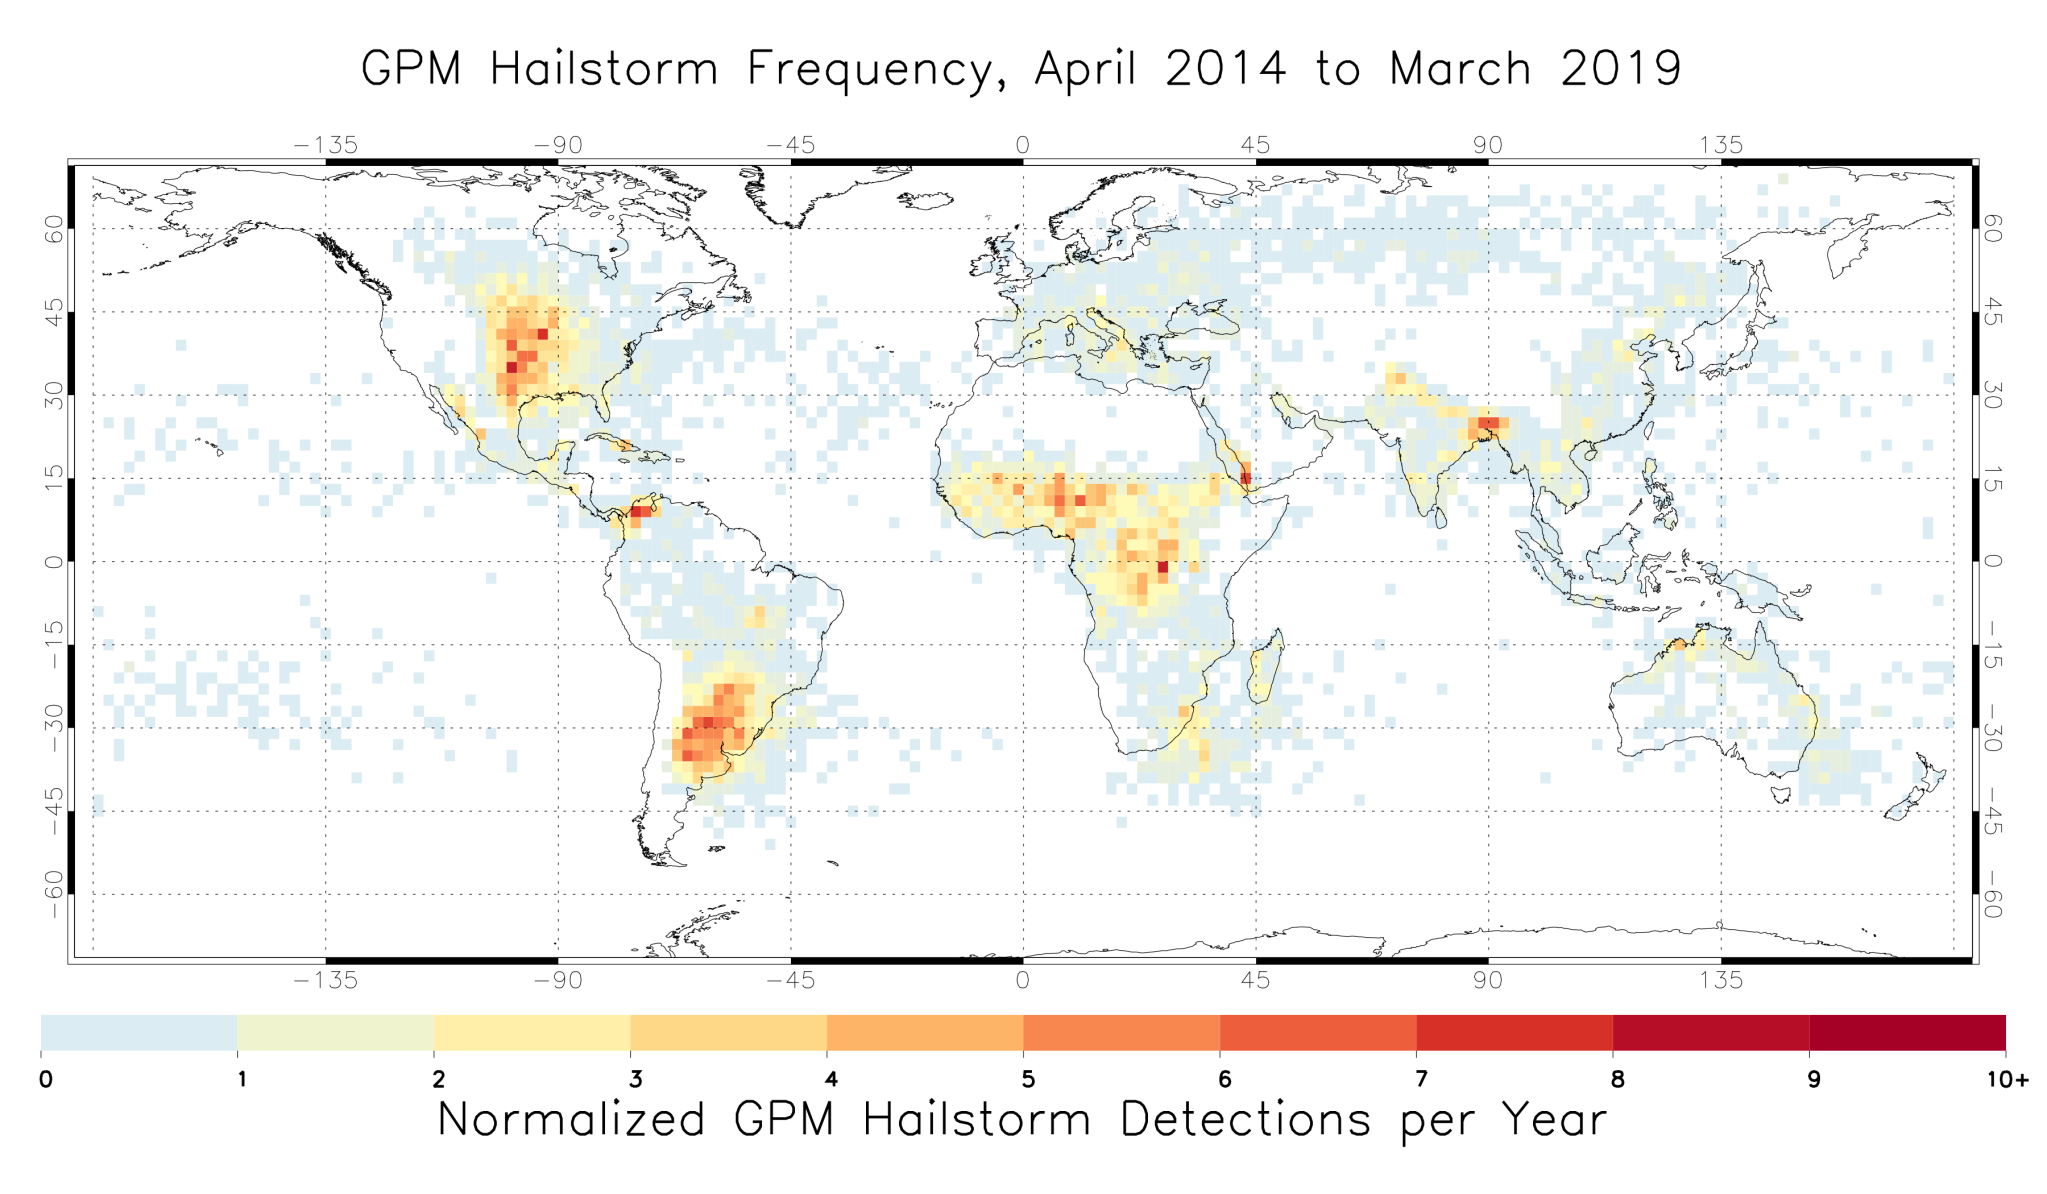 Climatology of annual frequency of hailstorms, detected between April 2014 and March 2019.